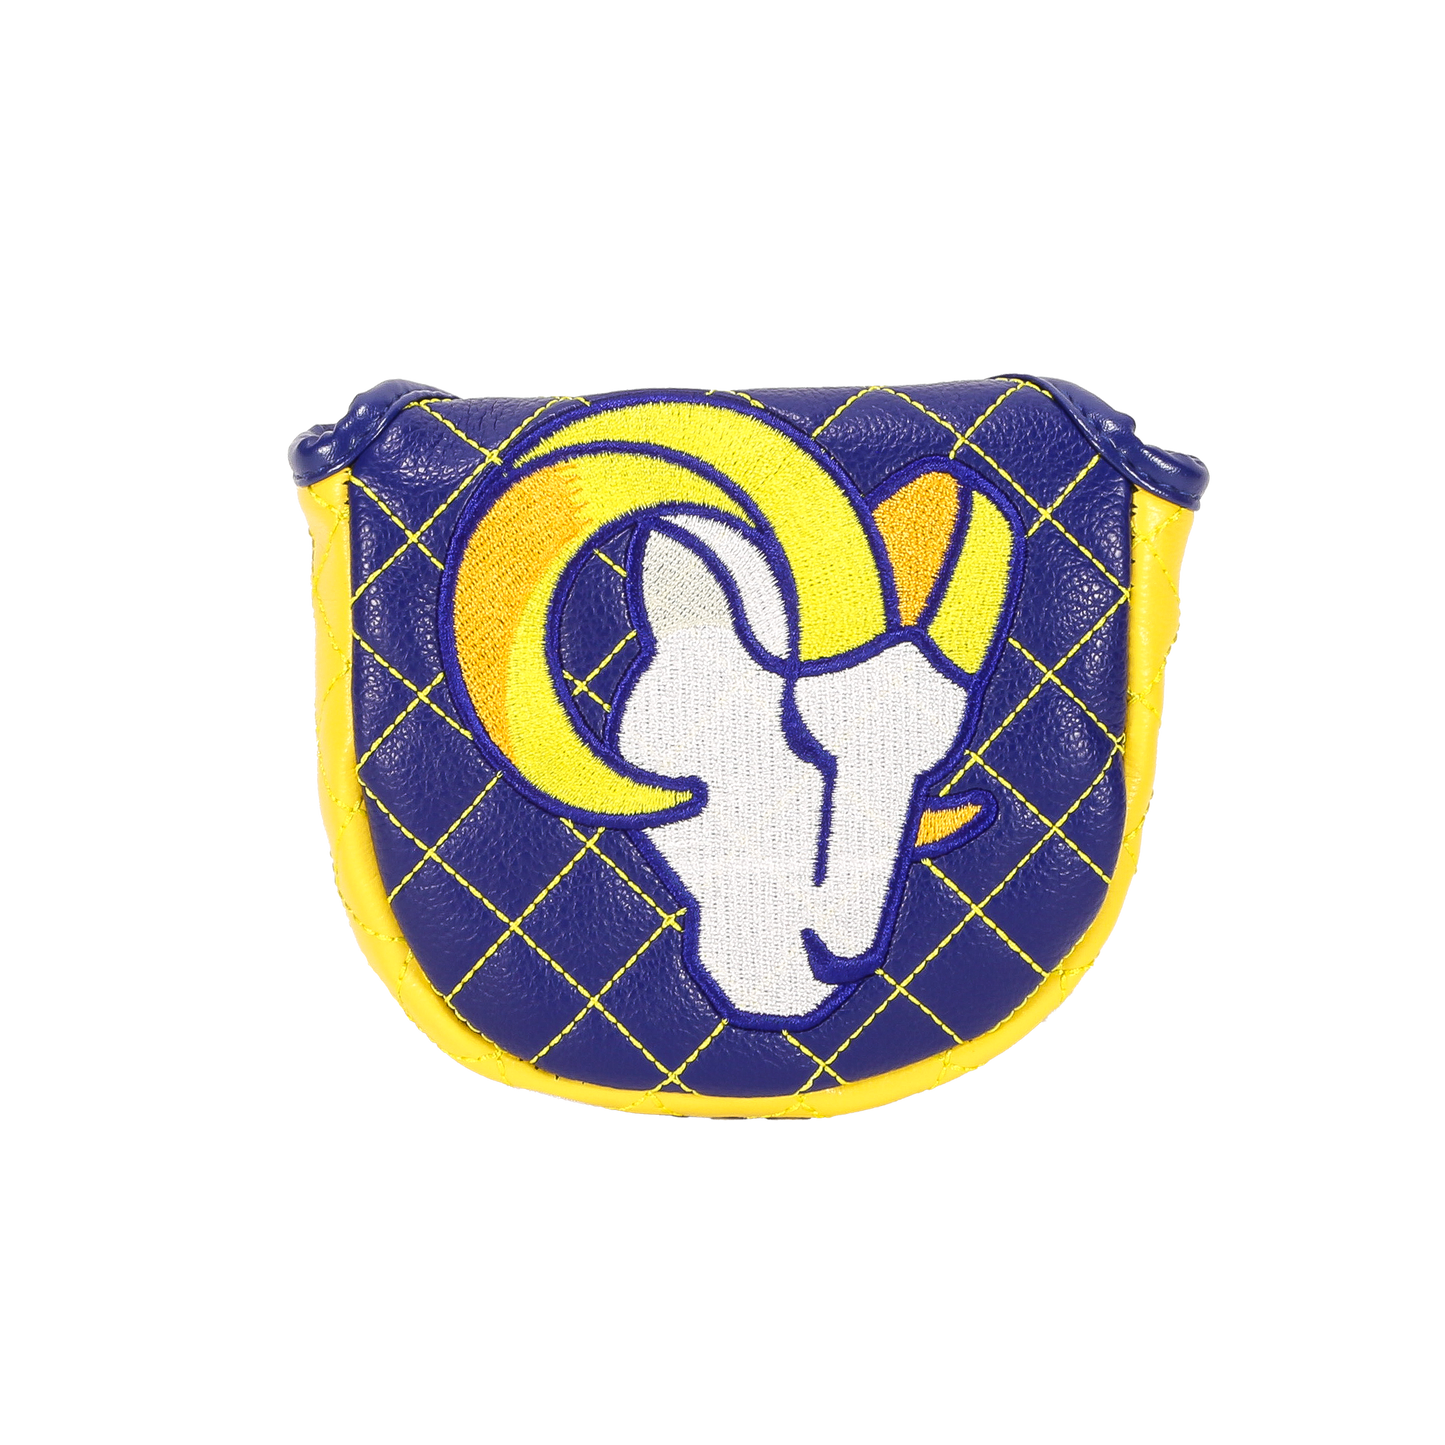 Los Angeles "Rams" Mallet Putter Cover